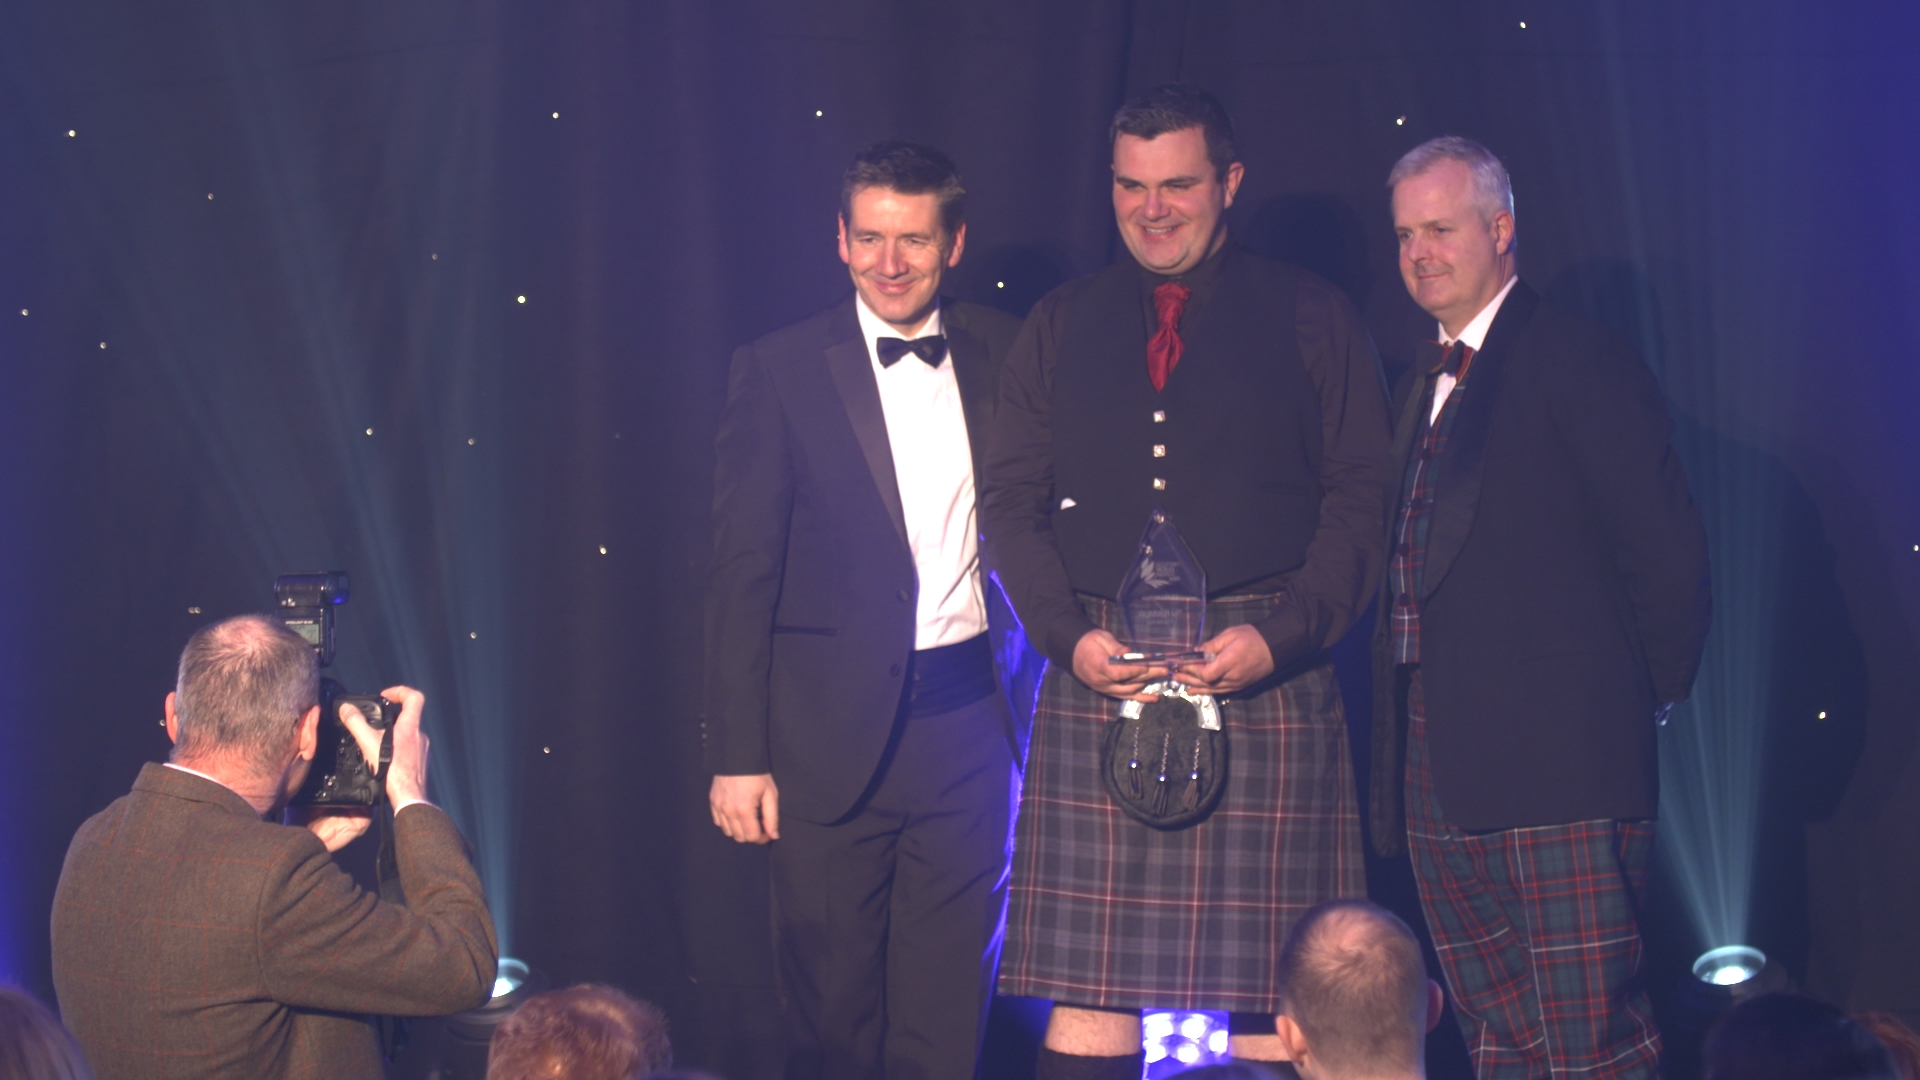 Sweeny on stage at the Scottish Rural Awards